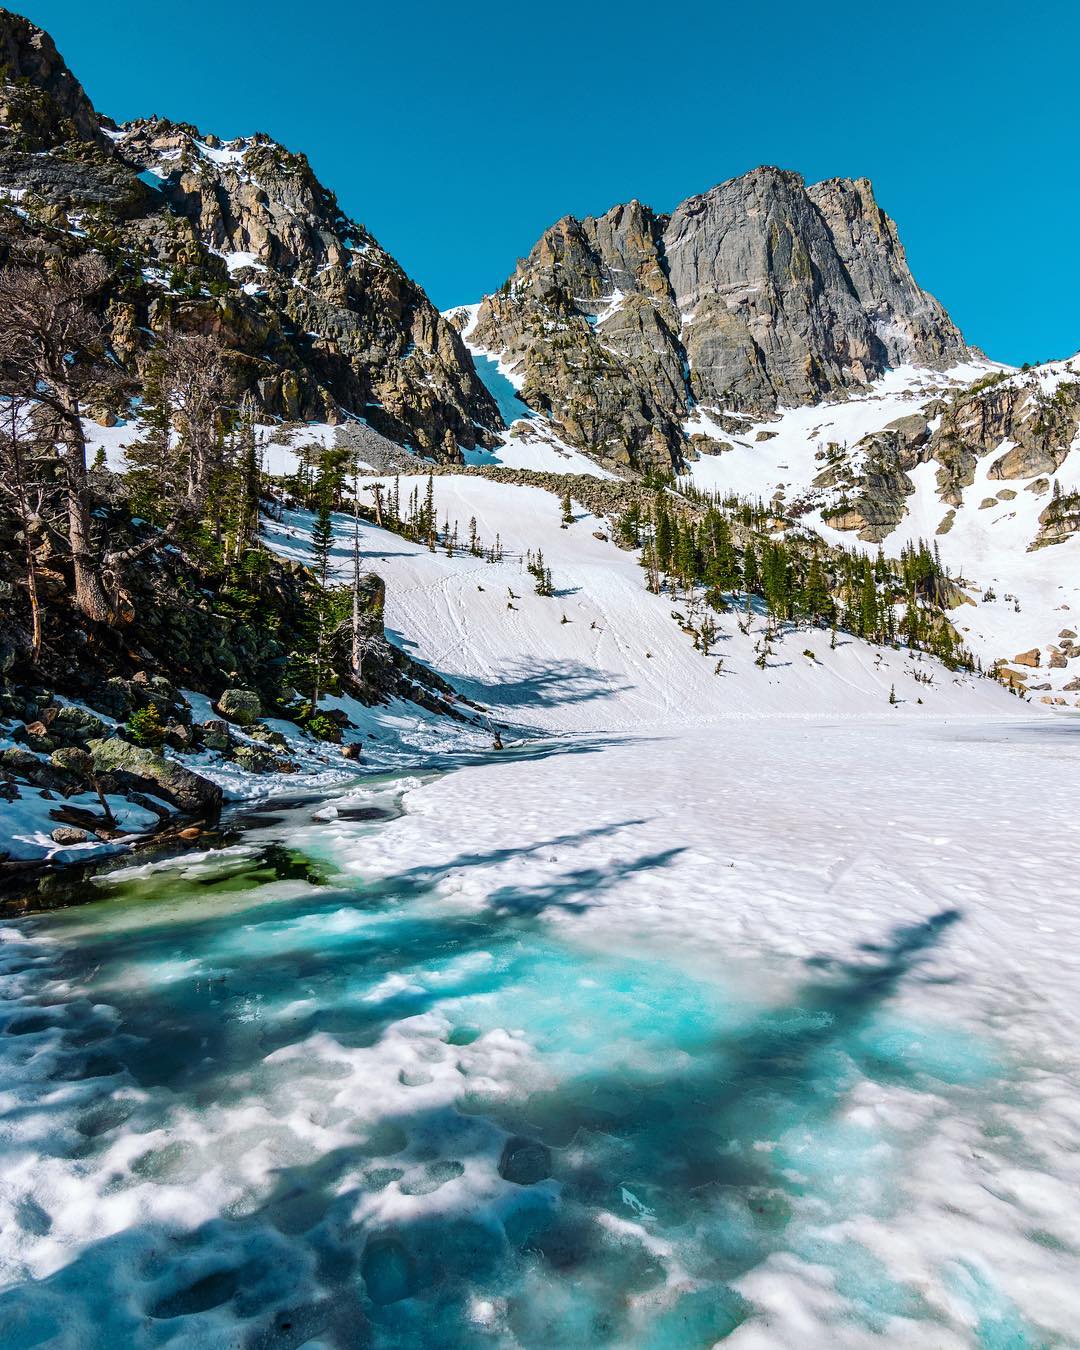 Rocky Mountain National Park in Estes Park, CO. Photo by Instagram user @the_great_gatzby